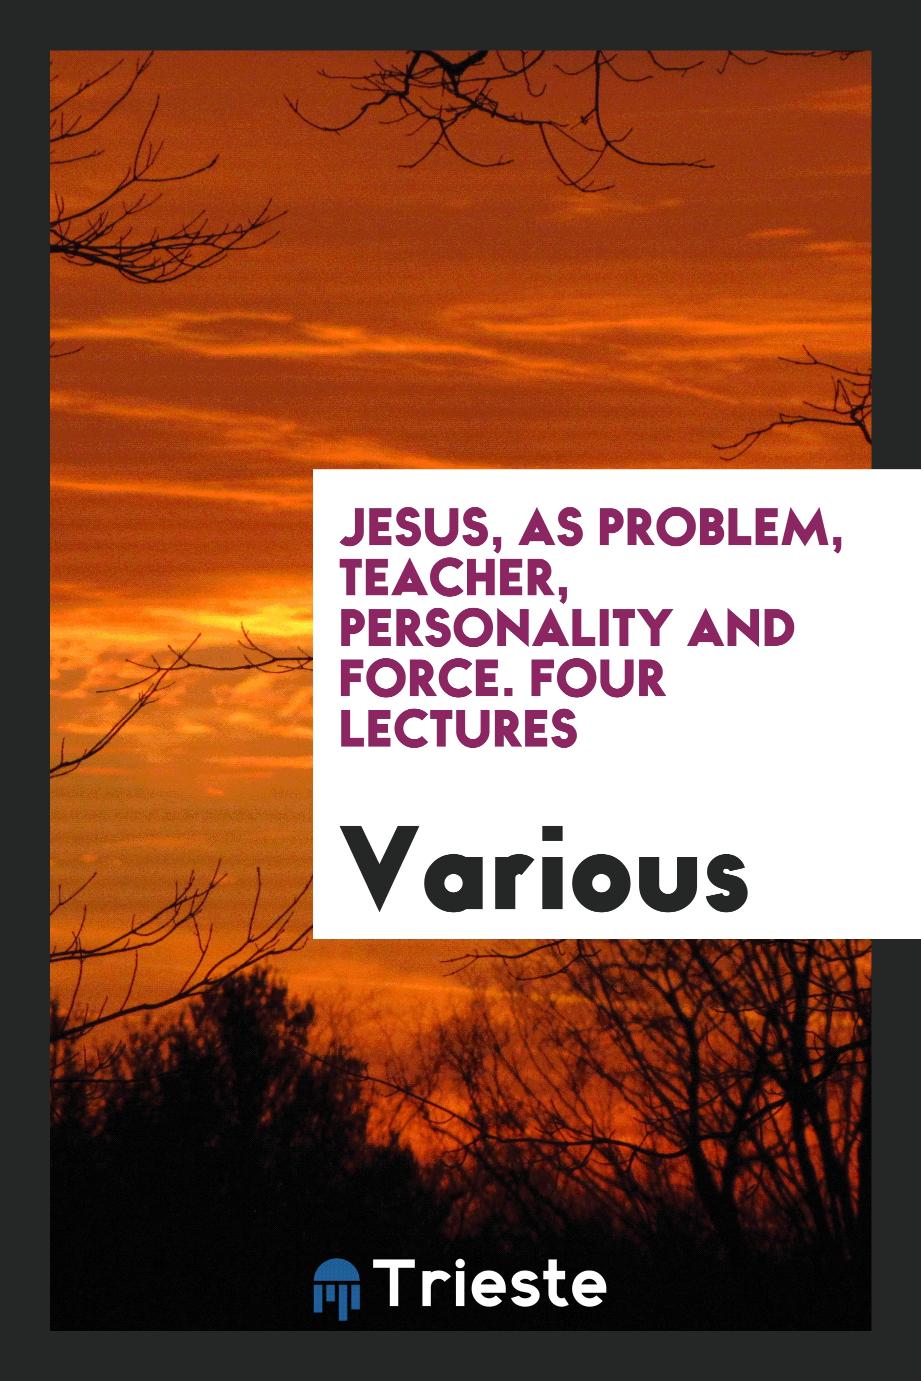 Jesus, as problem, teacher, personality and force. Four lectures